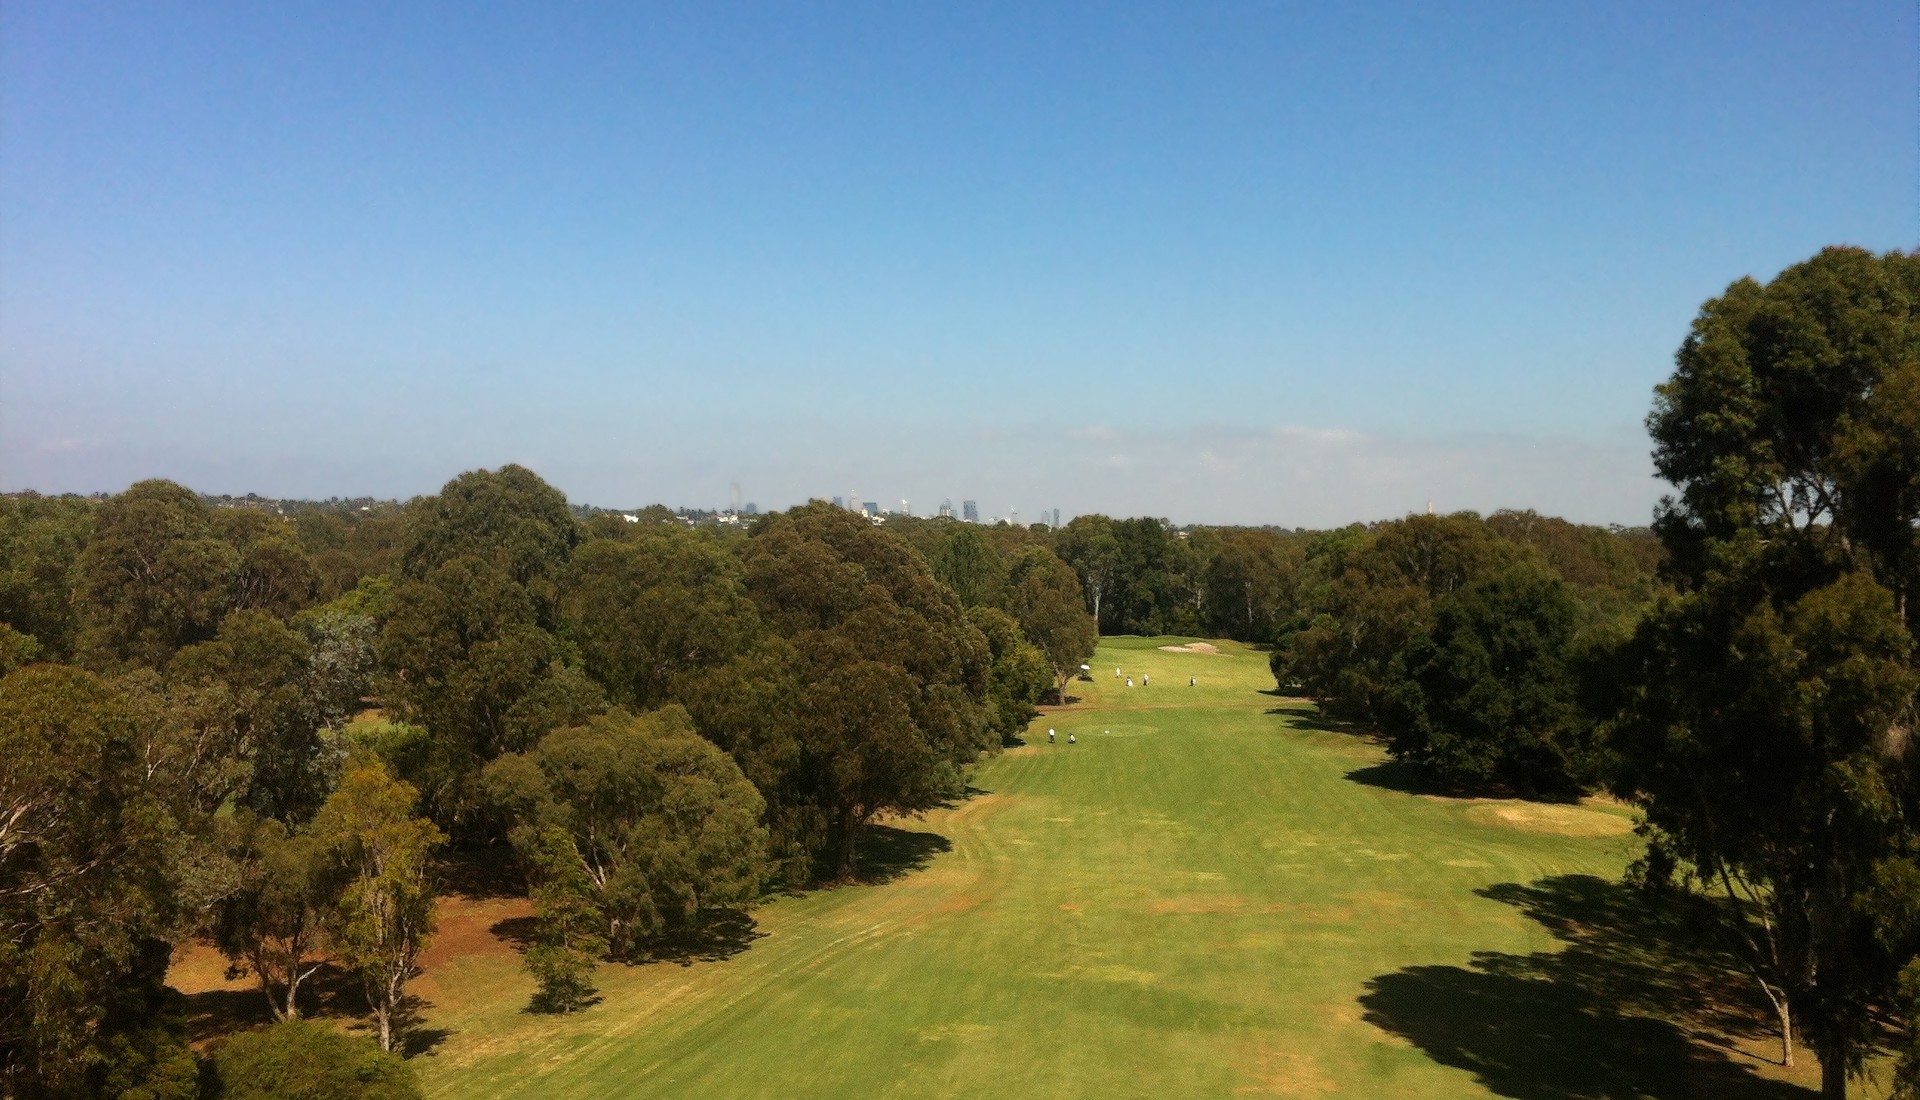 Melbourne golf course with some braced trees.